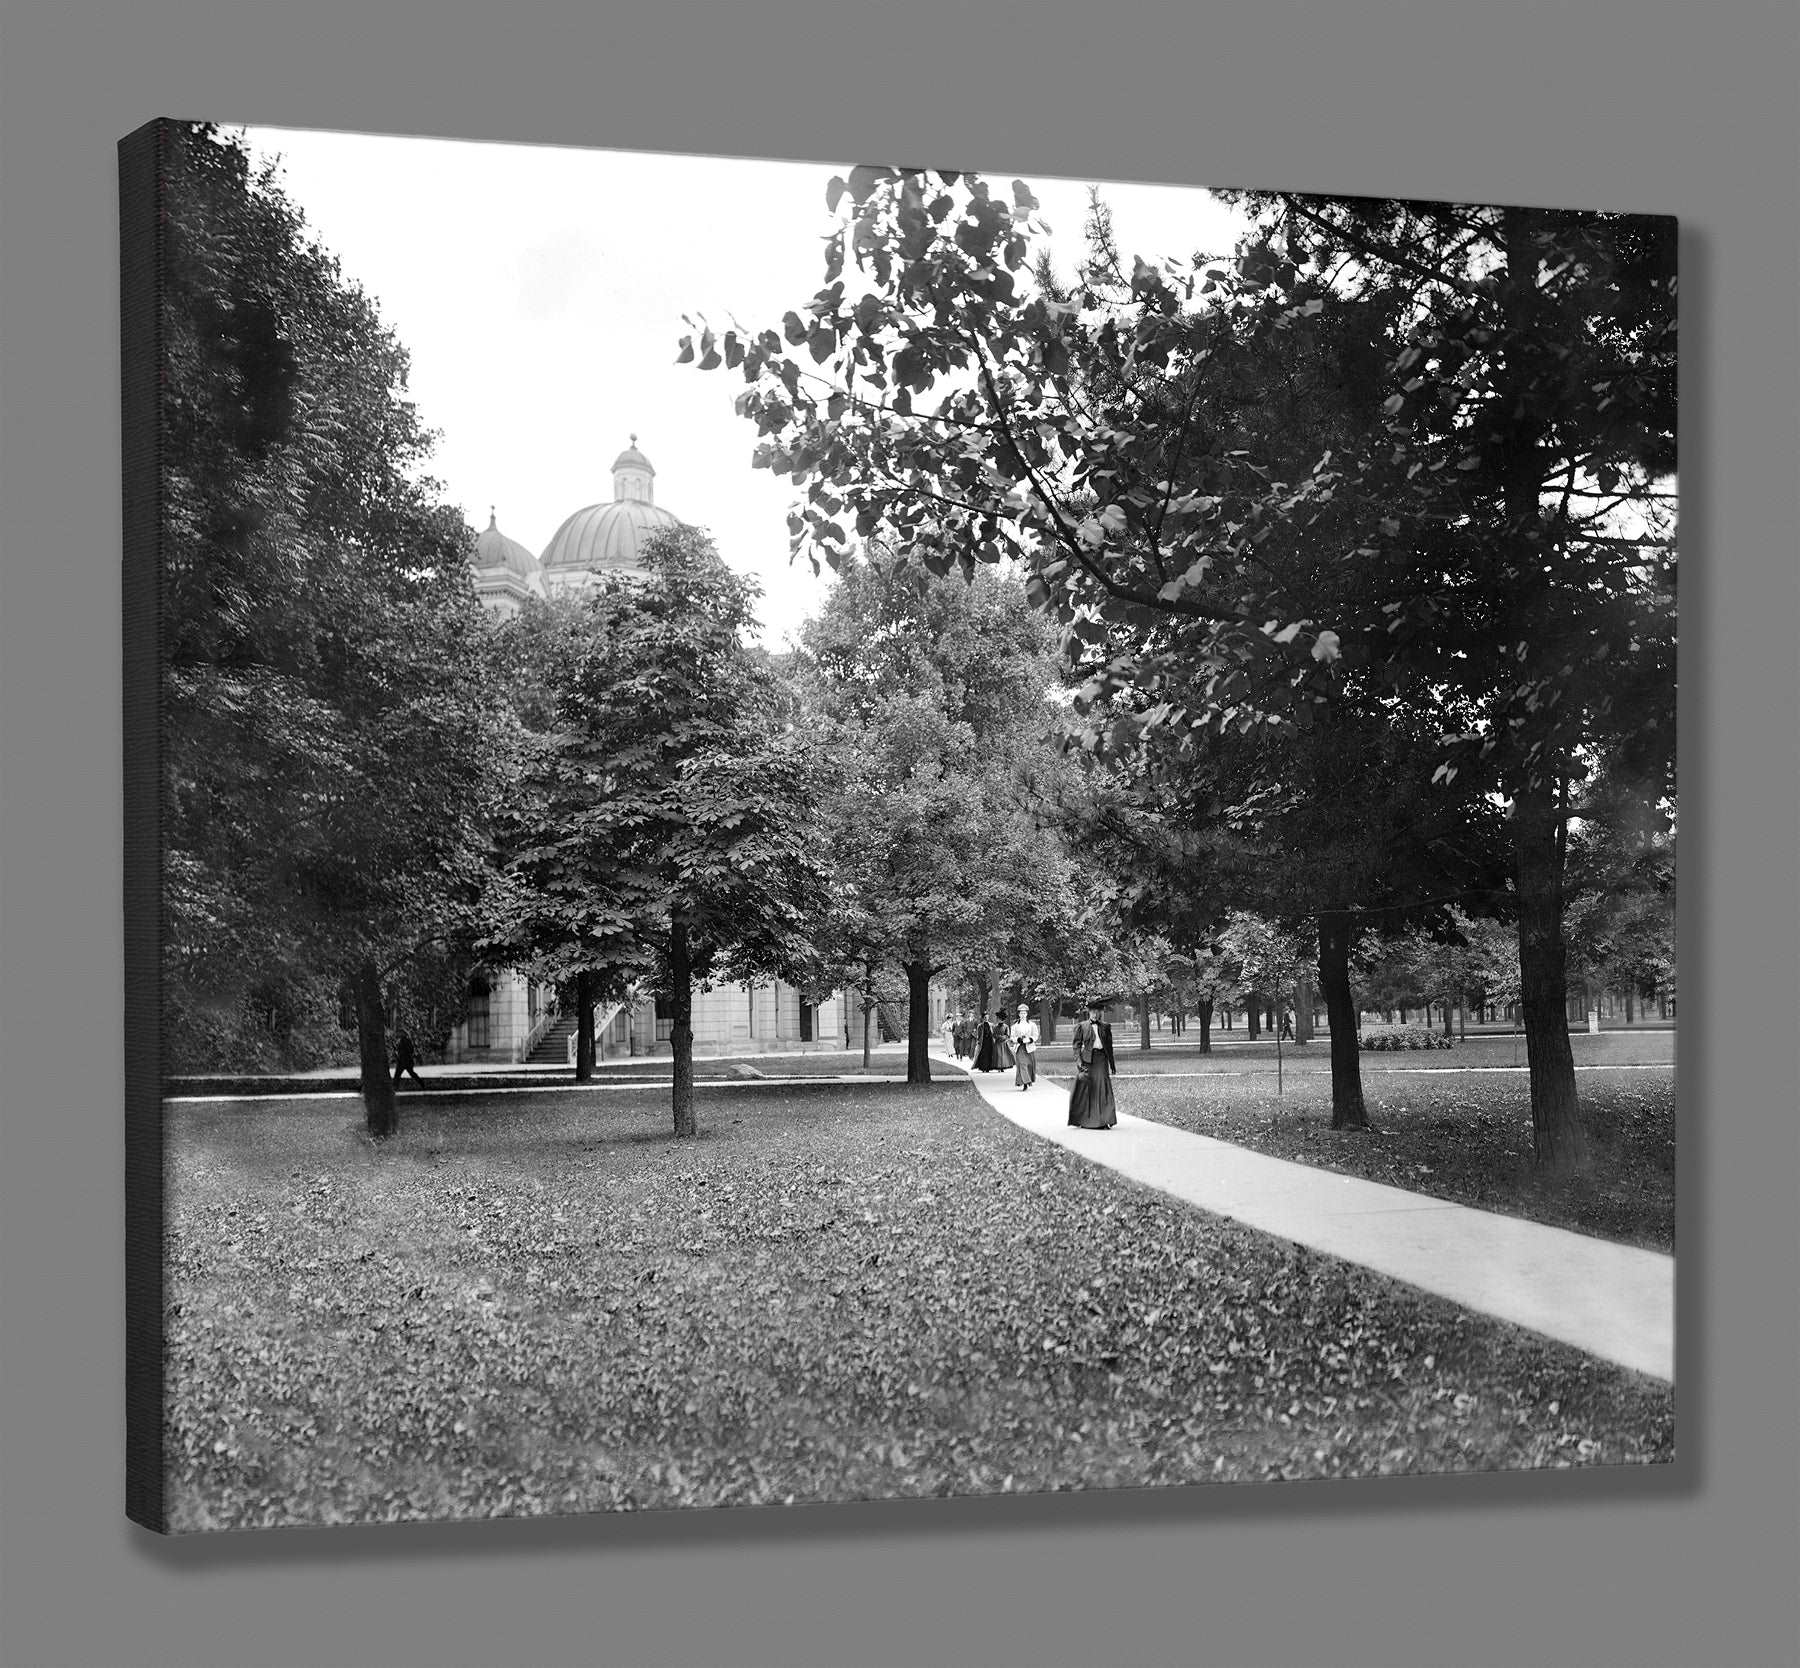 A rendering of a canvas print of a vintage photograph of the campus of the University of Michigan